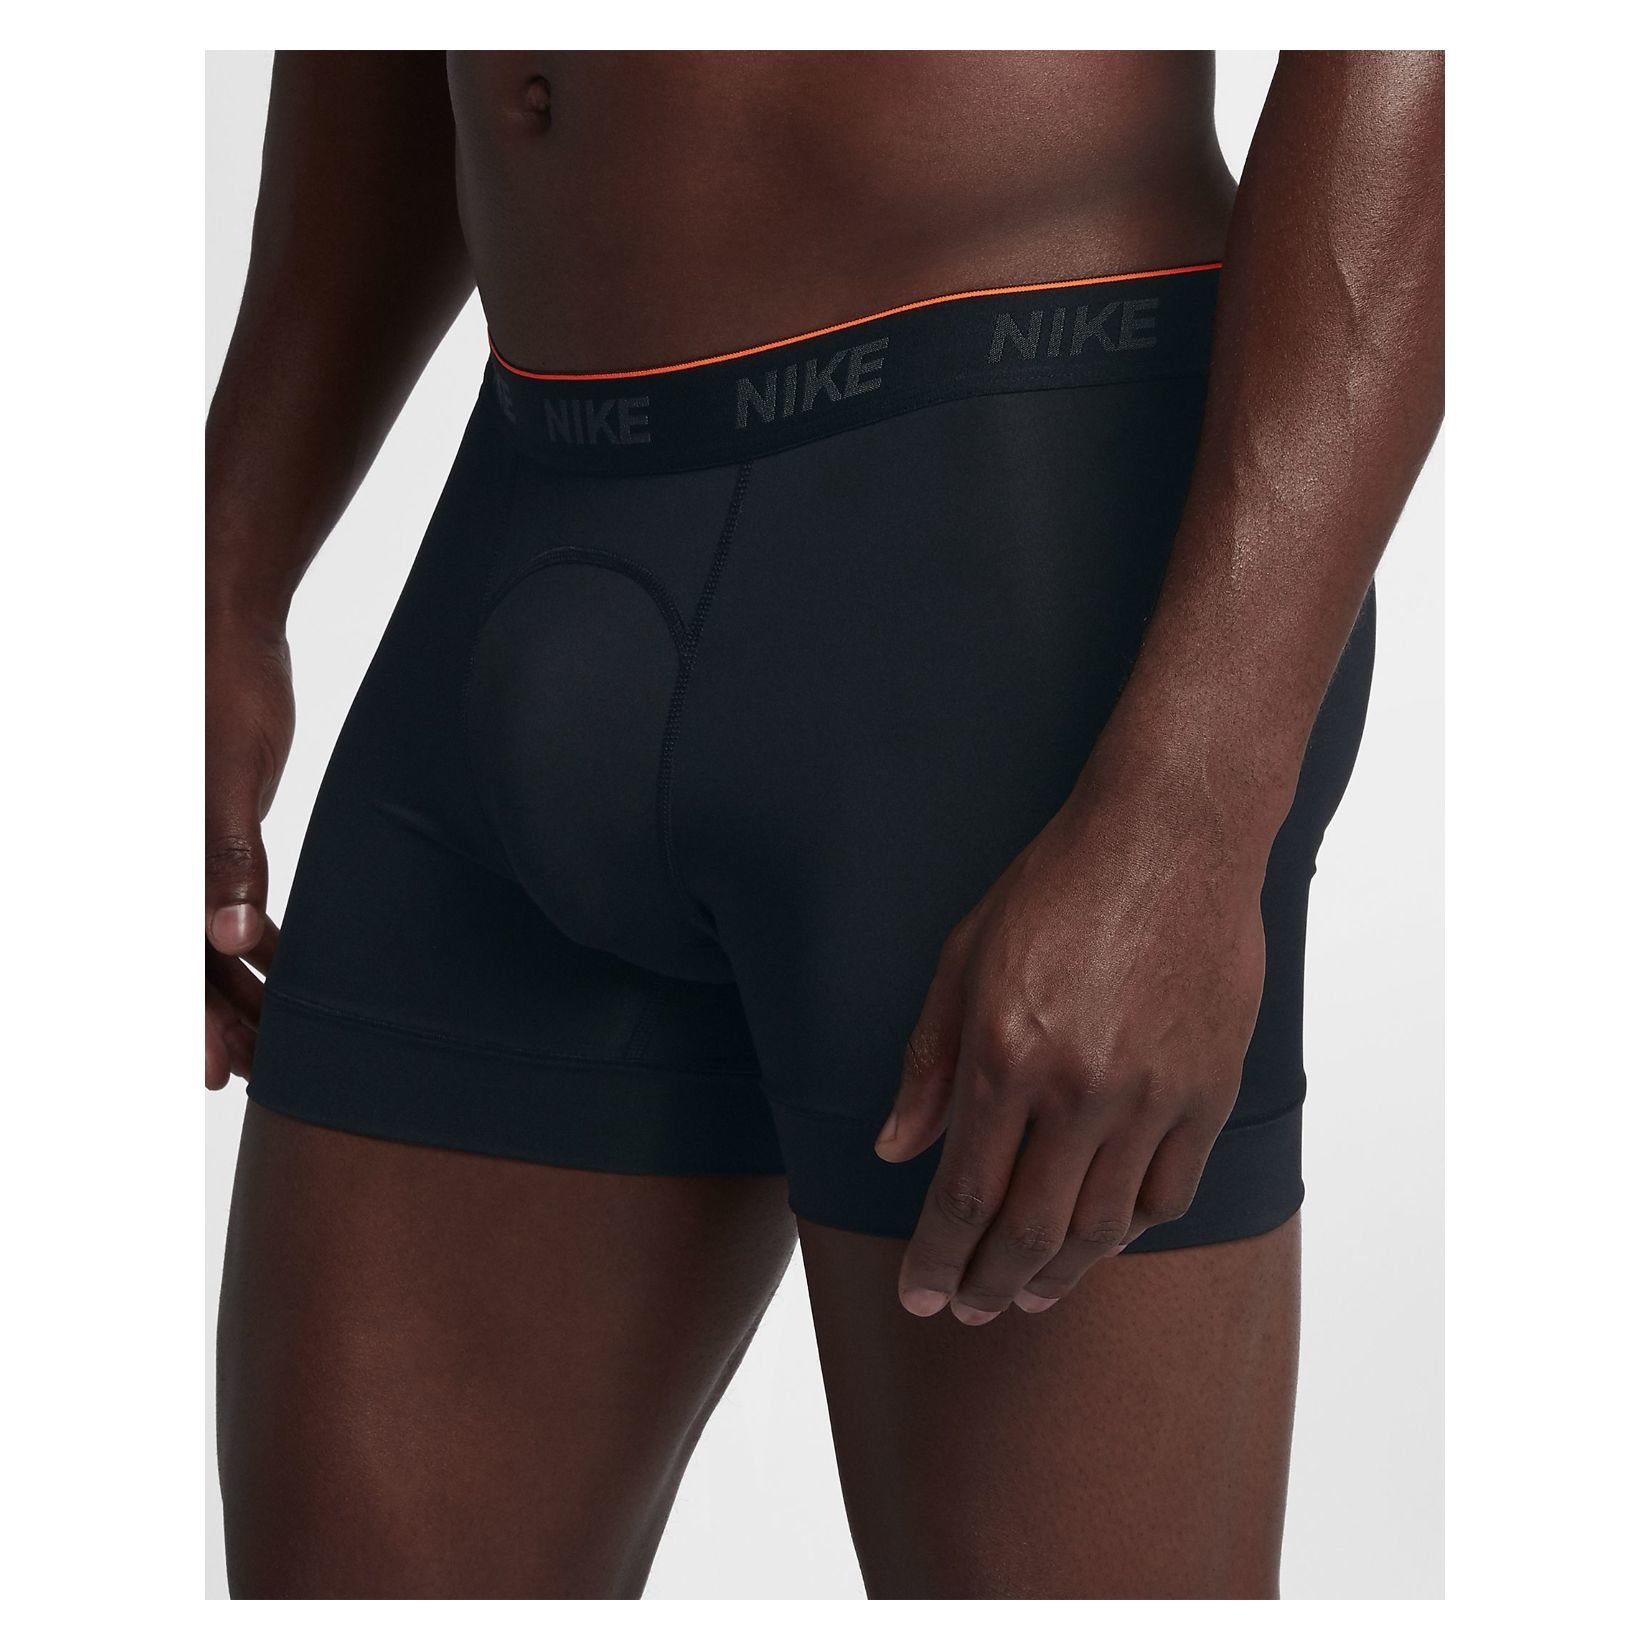 Nike Training Boxer Briefs (2 Pack)